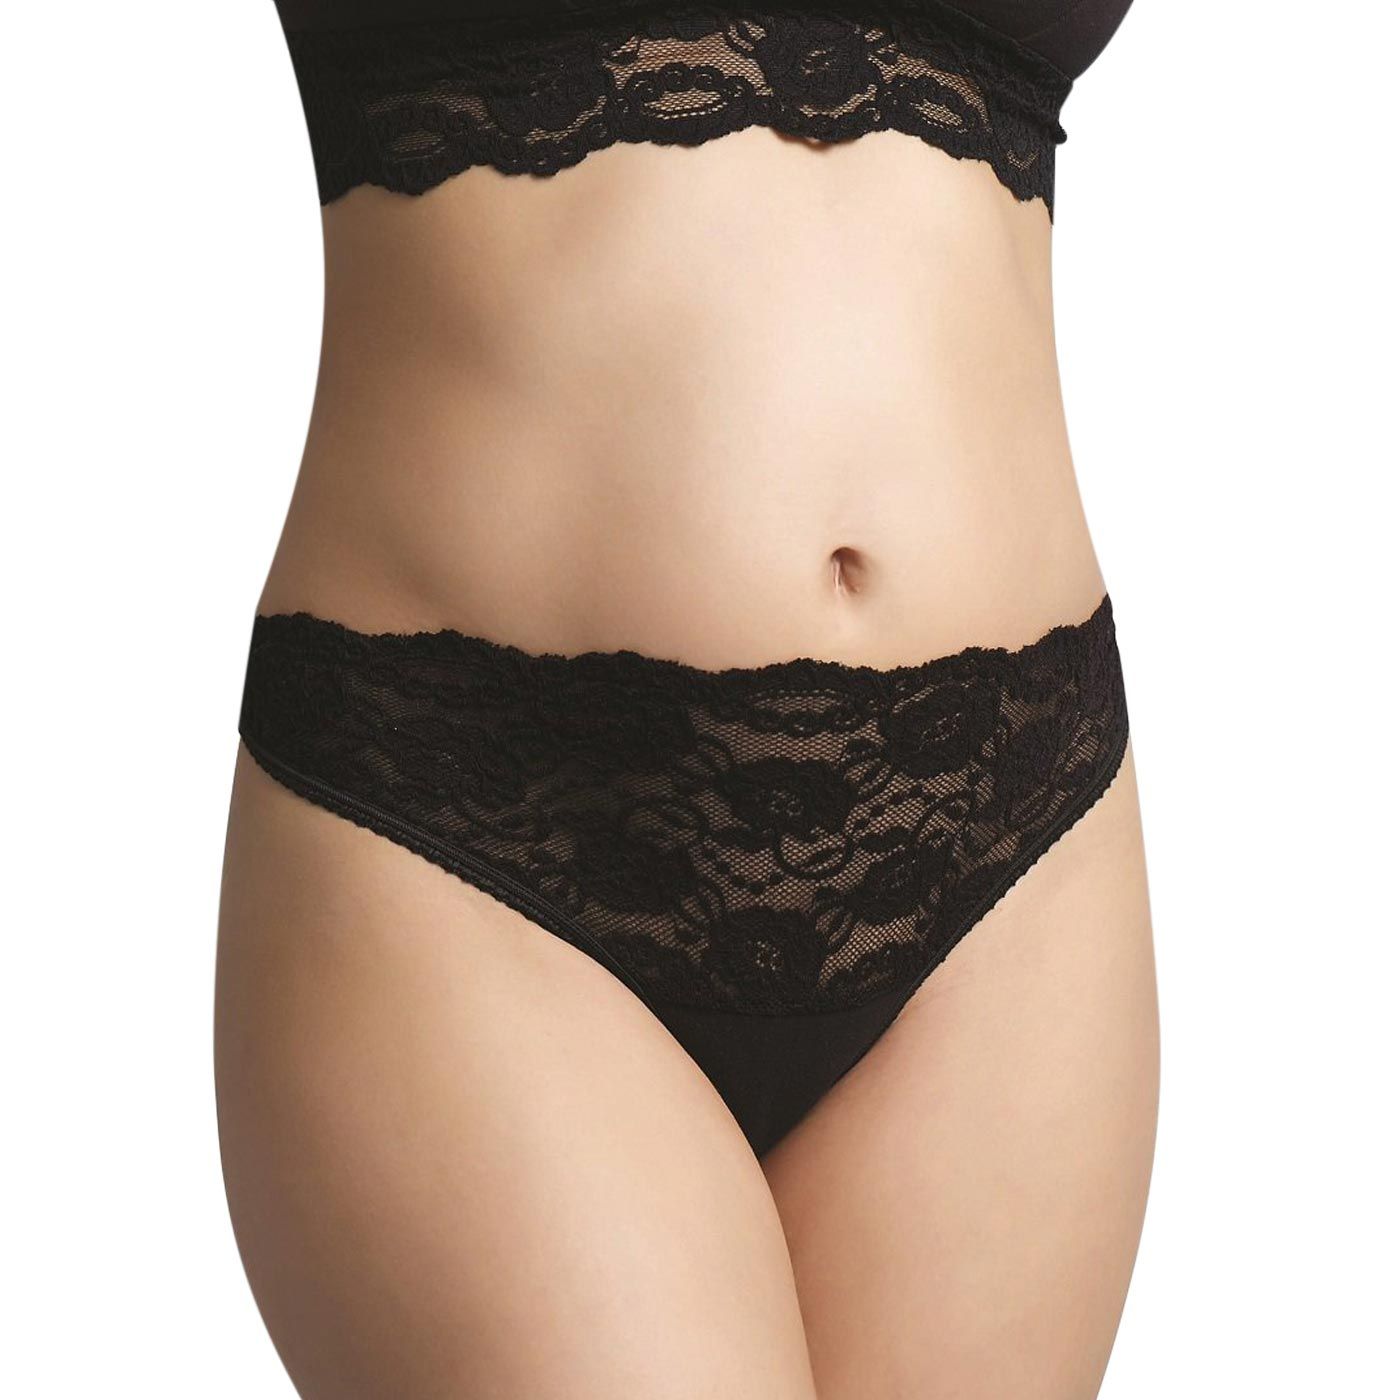 Carriwell Lace Stretch Panties-M-Black - 2